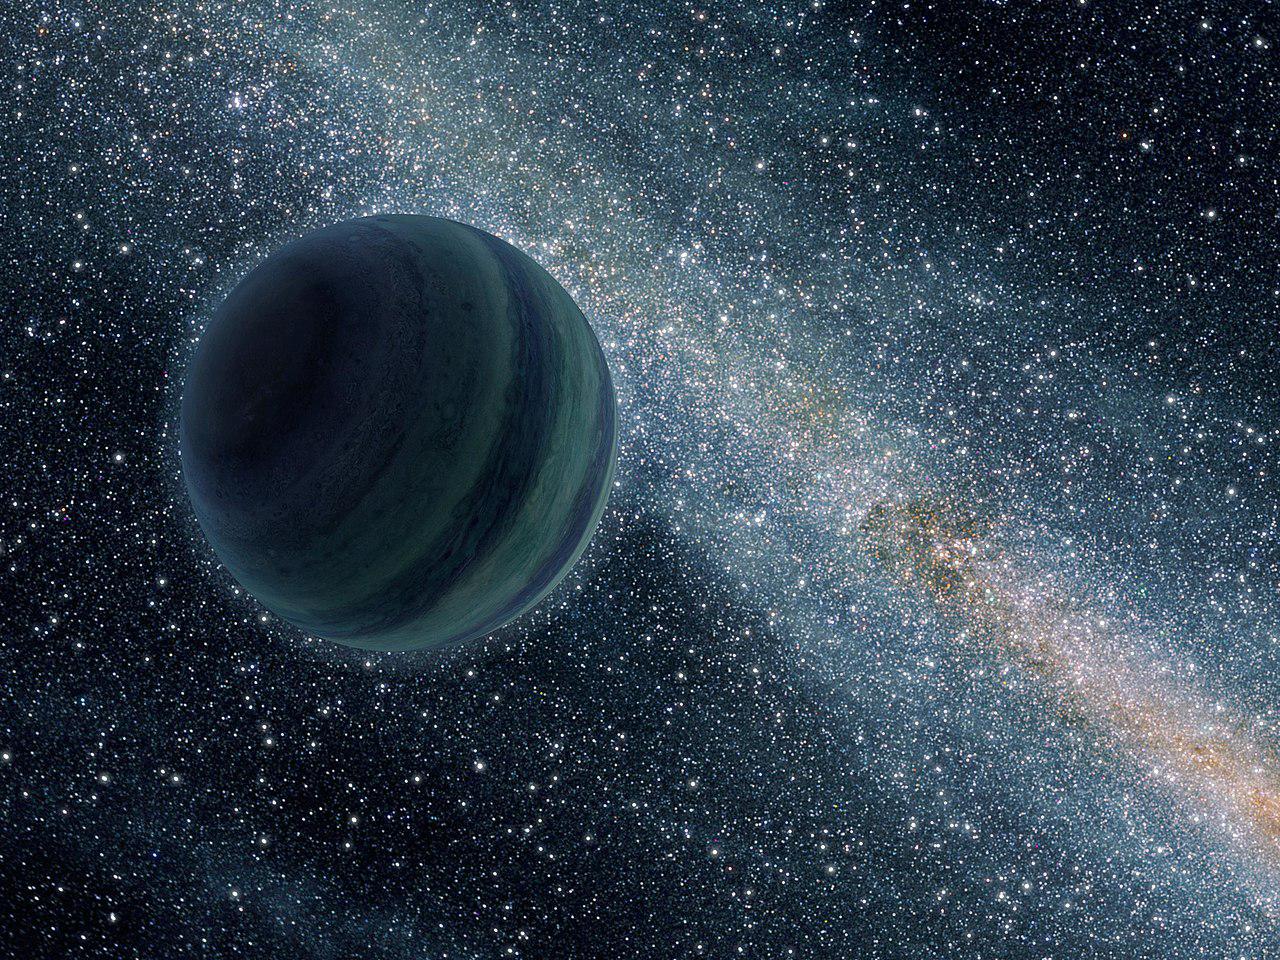 https://universemagazine.com/wp-content/uploads/2020/10/1280px-Alone_in_Space_-_Astronomers_Find_New_Kind_of_Planet.jpg